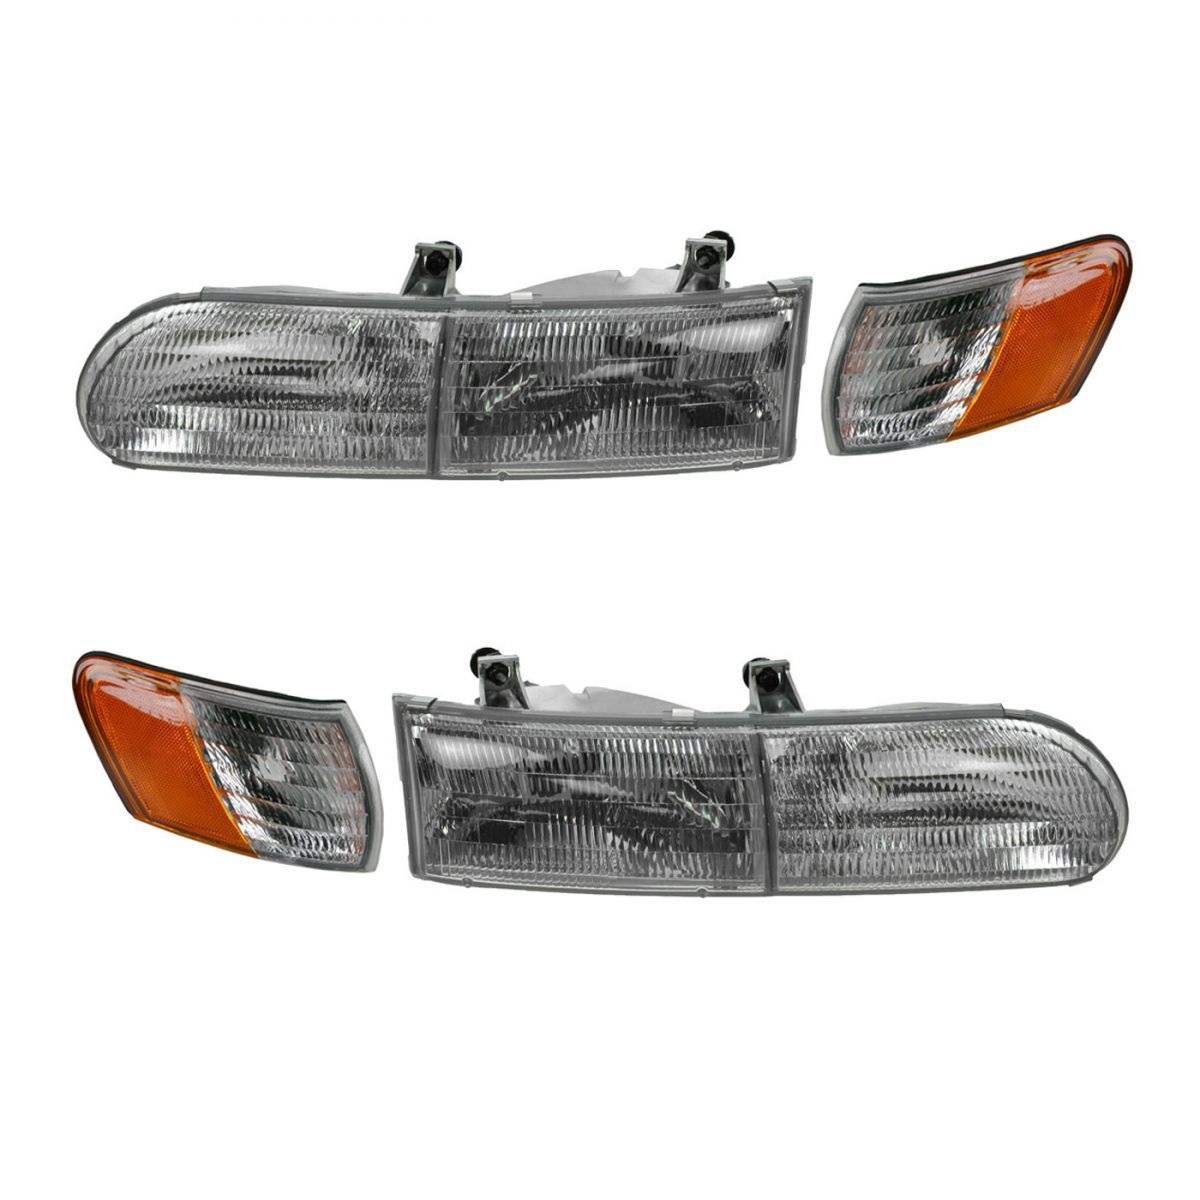 Gulf Stream Sun Voyager Replacement Headlights and Corner Turn Signal Lamps (4 Piece Set) (Left & Right)